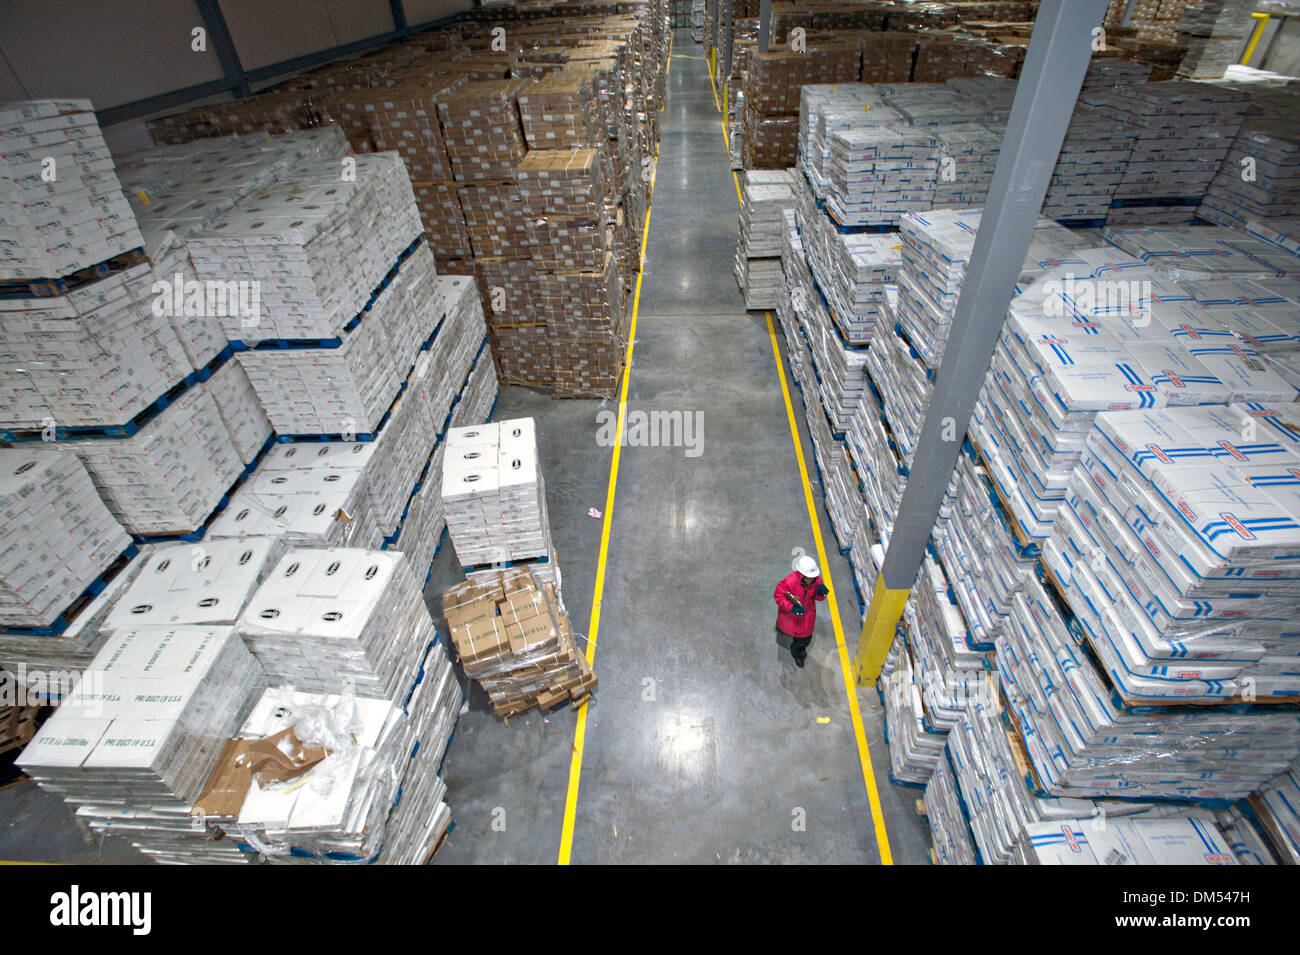 US Department of Agriculture Food Safety Inspector examines a shipment of imported frozen meat at the Port of New Orleans November 21, 2013 in New Orleans, LA. Stock Photo